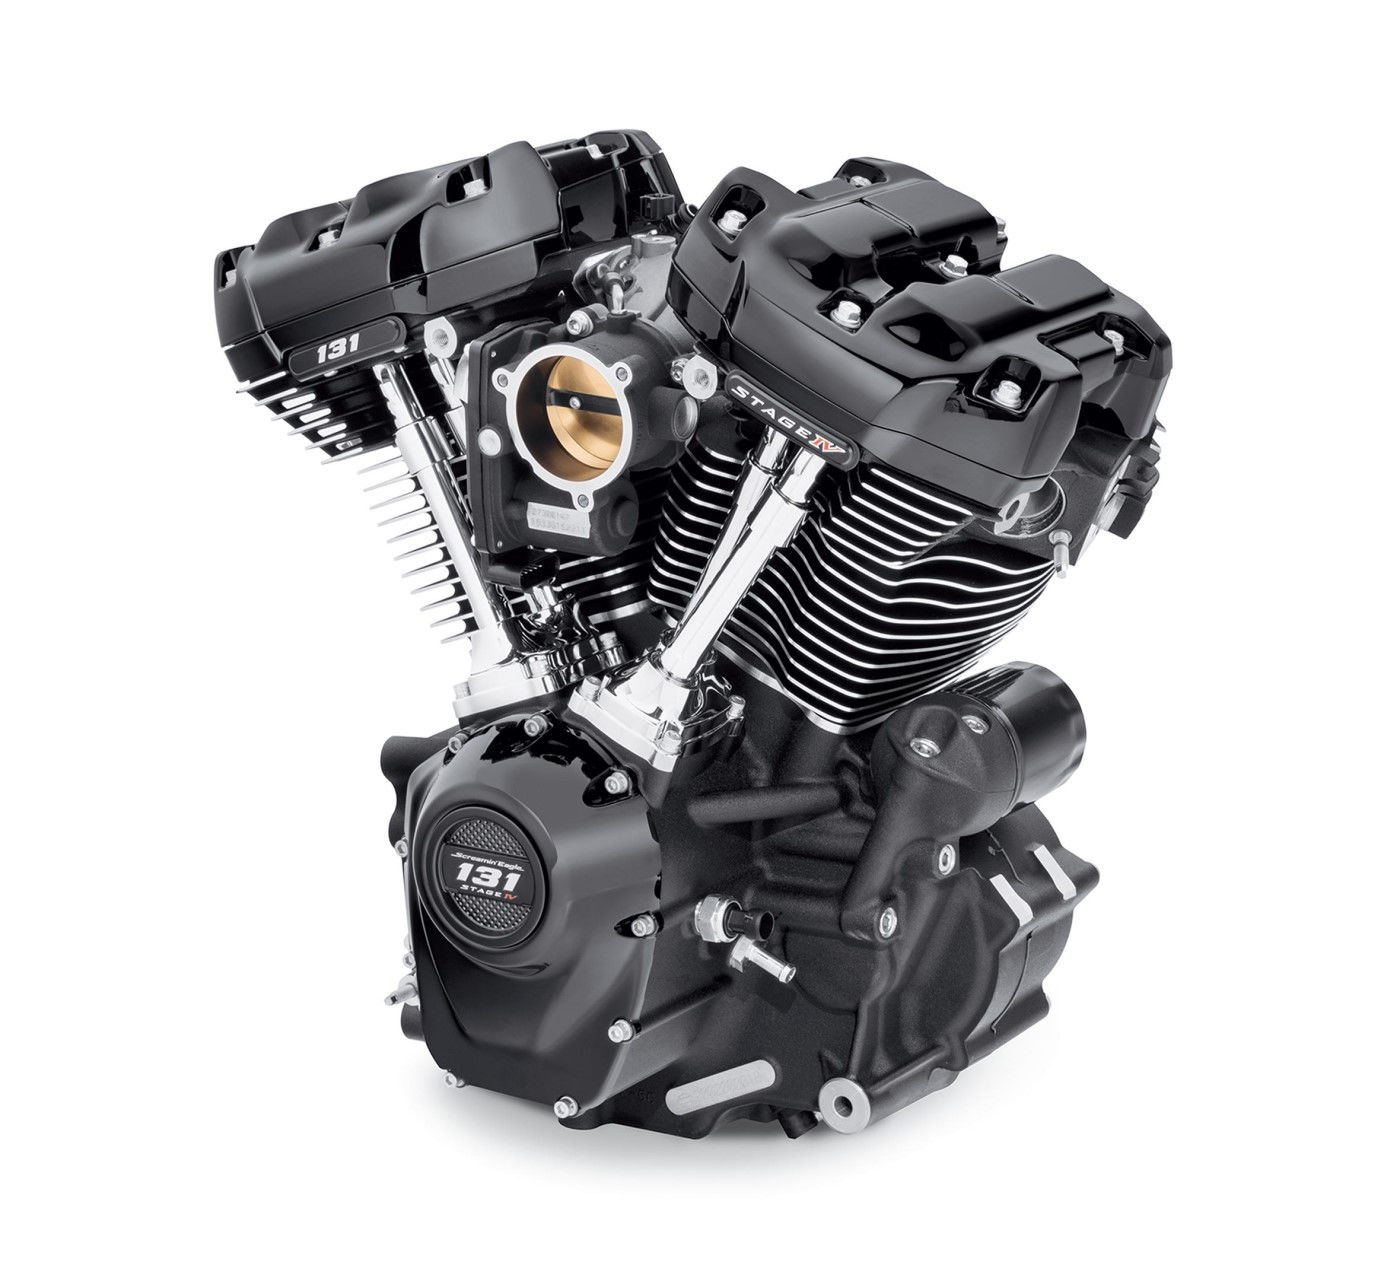 A Screamin’ Eagle Milwaukee-Eight 131 Crate Engine for select Softail® model Harley-Davidson motorcycles. Photo courtesy Harley-Davidson.